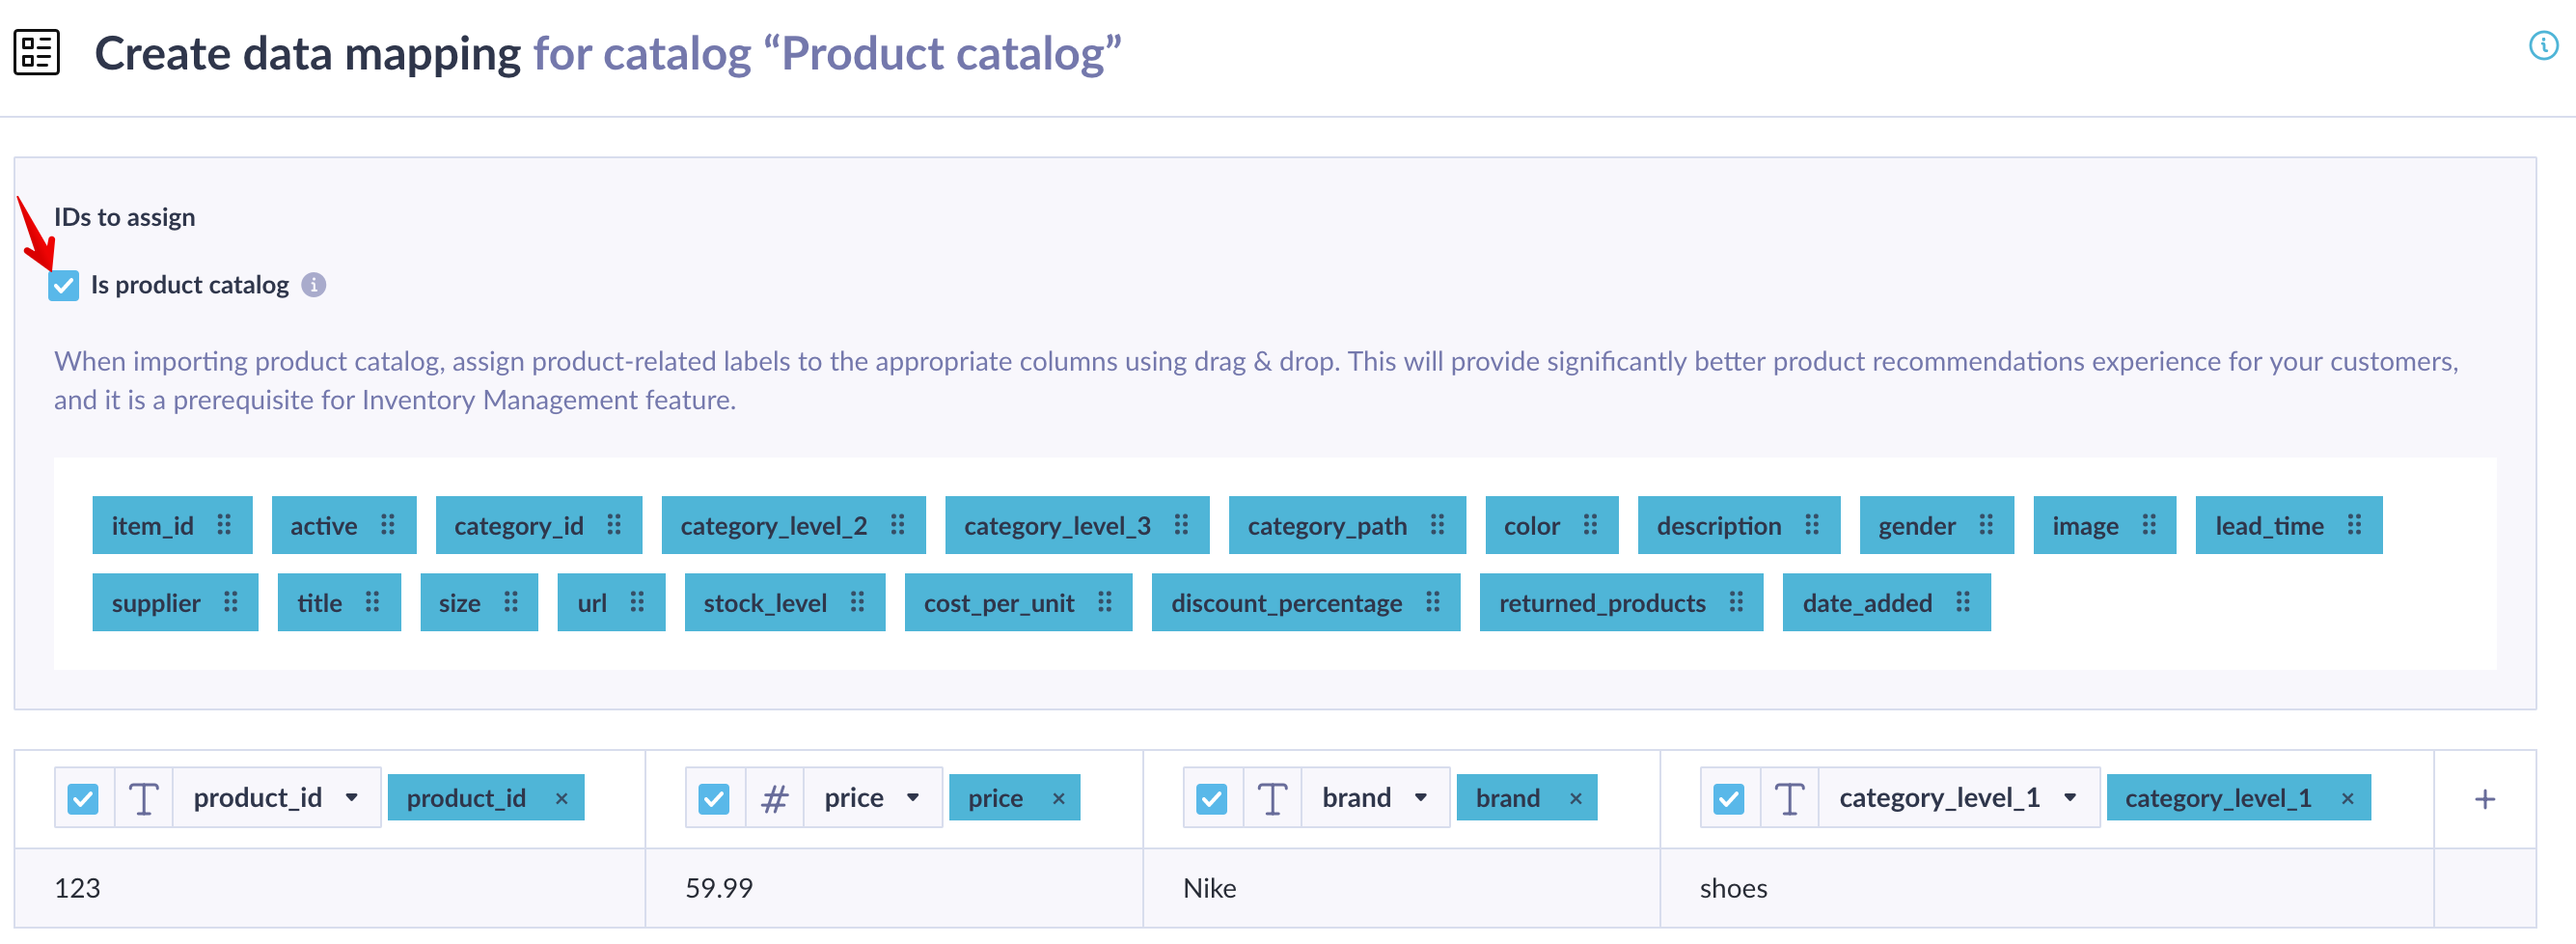 Map predefined IDs to you data structure. If you are importing a general catalog only "item_id" is available and mandatory.